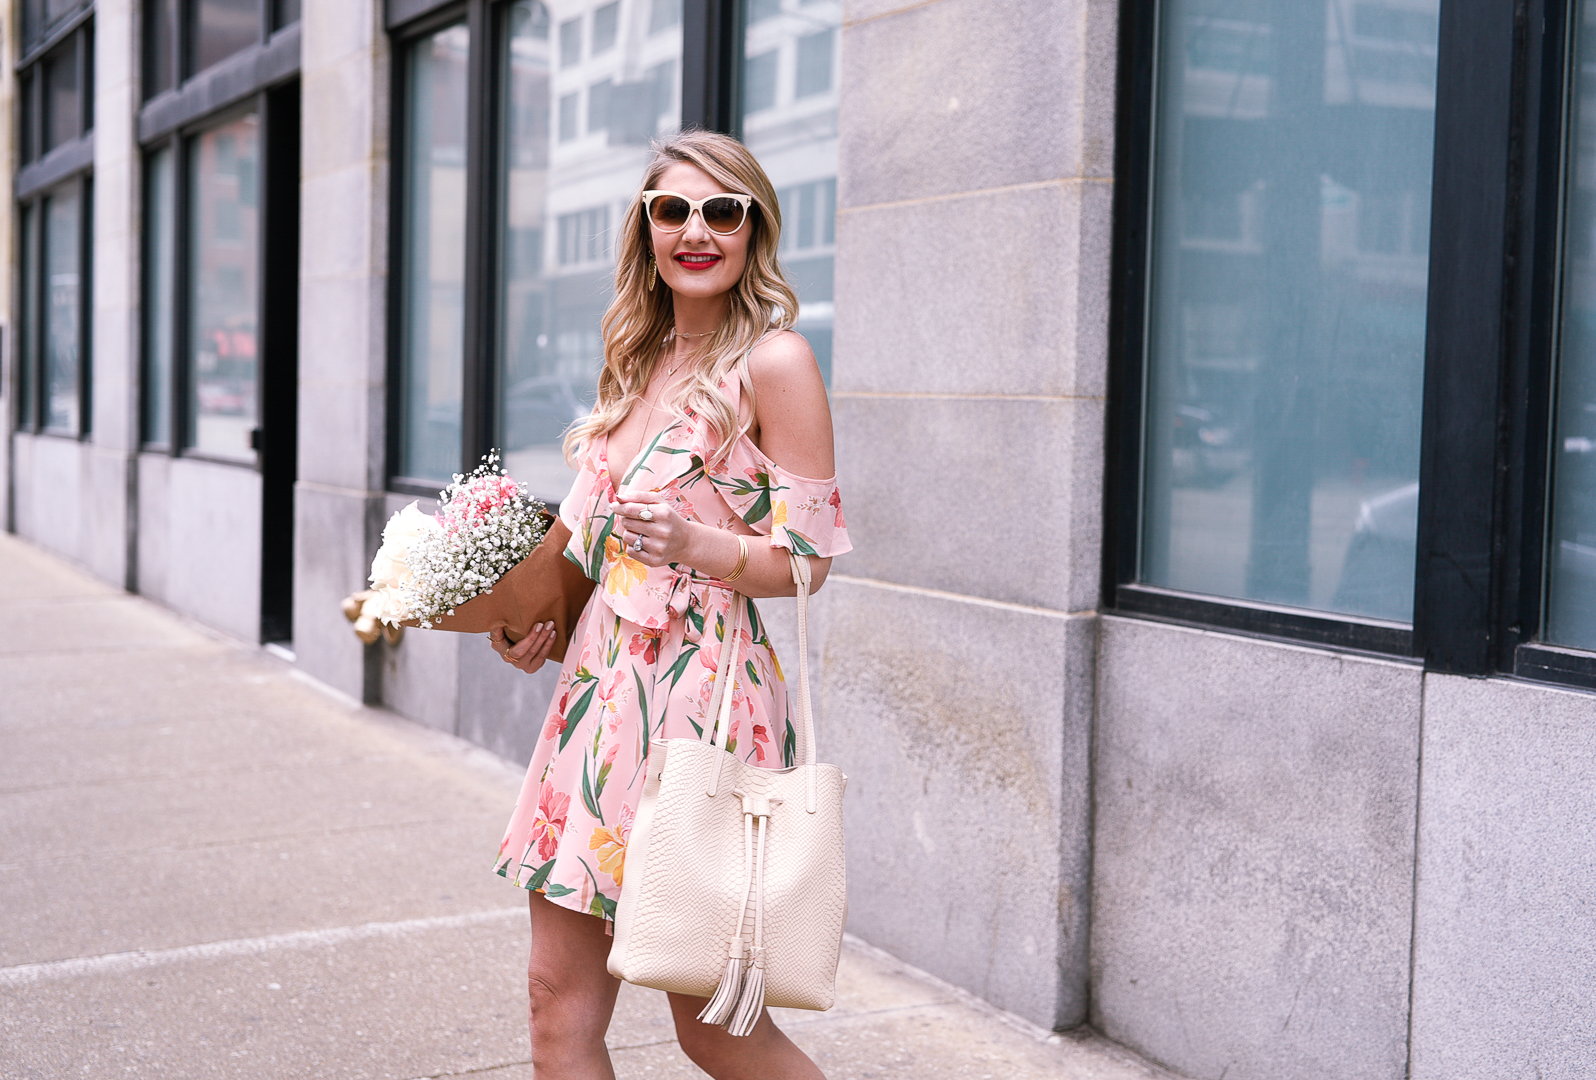 Jenna Colgrove wearing the Privacy Please x Revolve Hamlet floral wrap dress in pink.